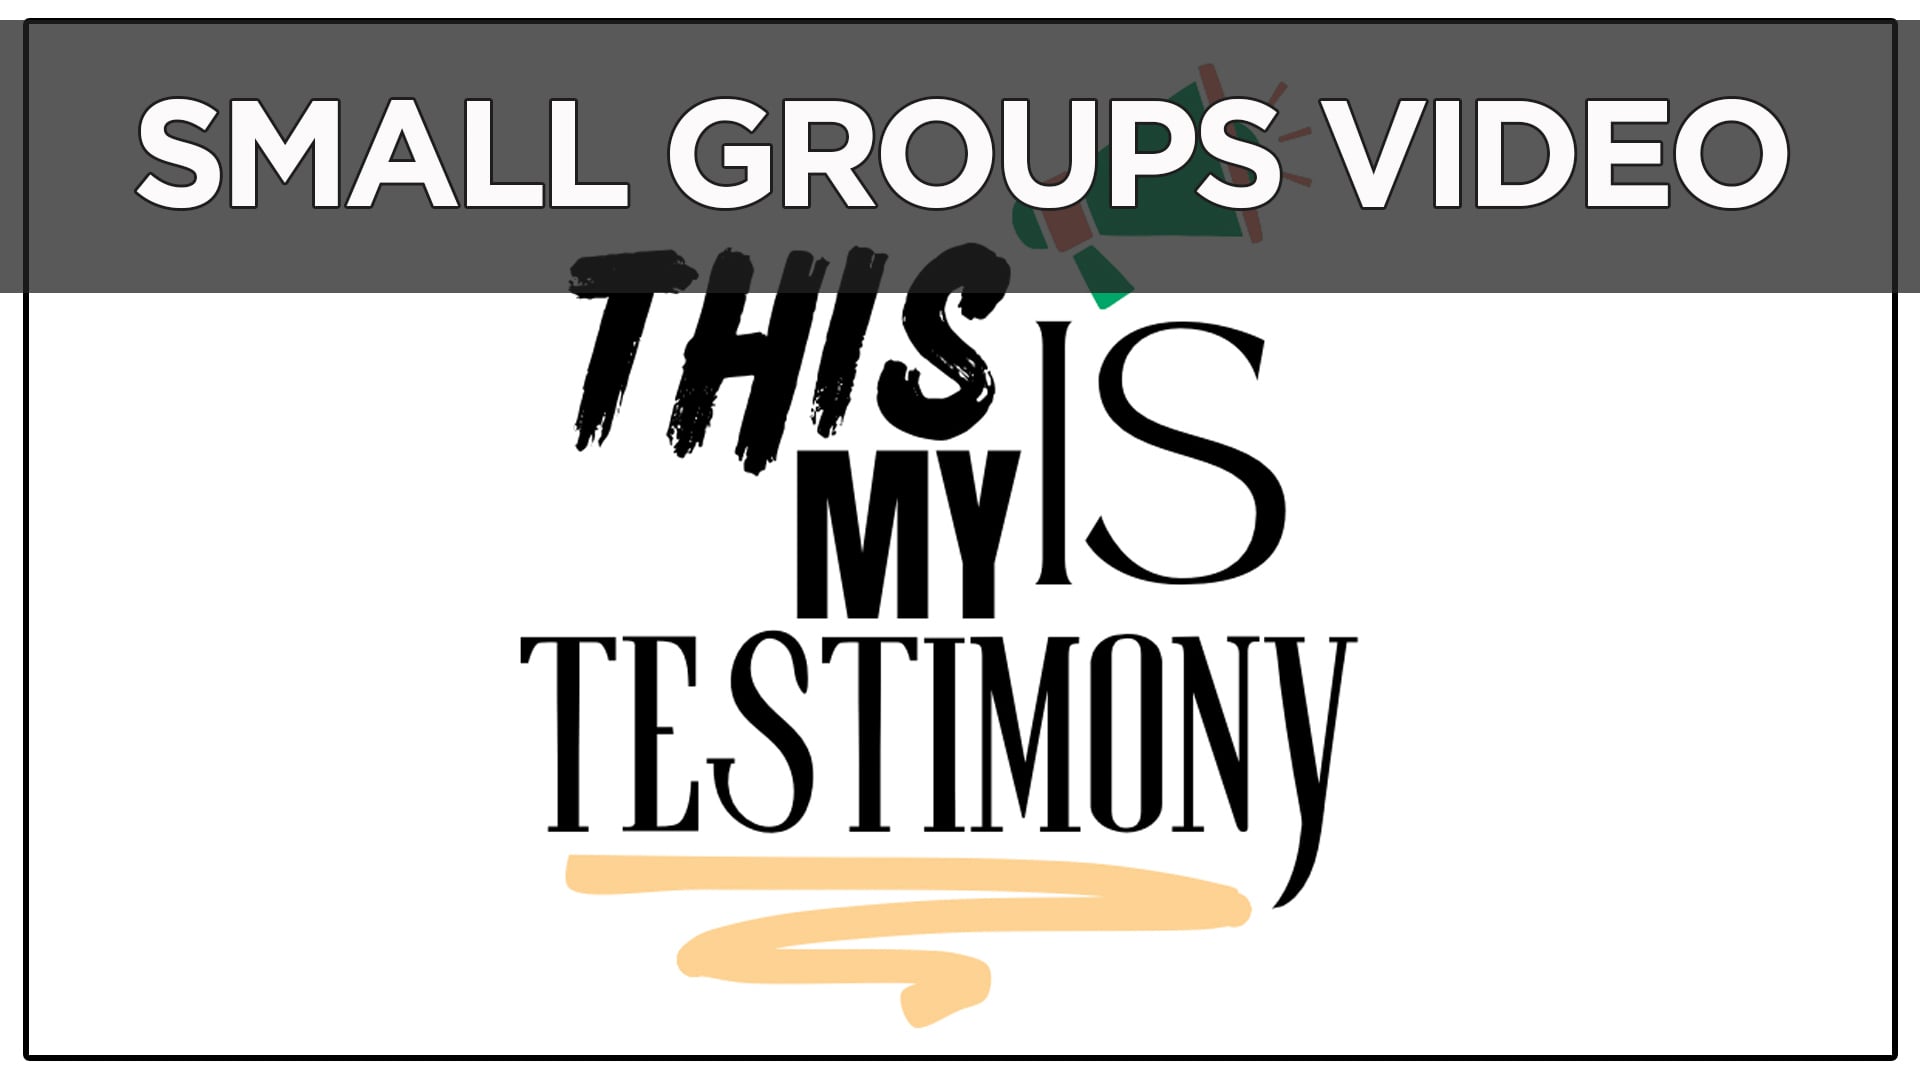 Small Groups Video: 6 Weeks of Testimony - Session 4